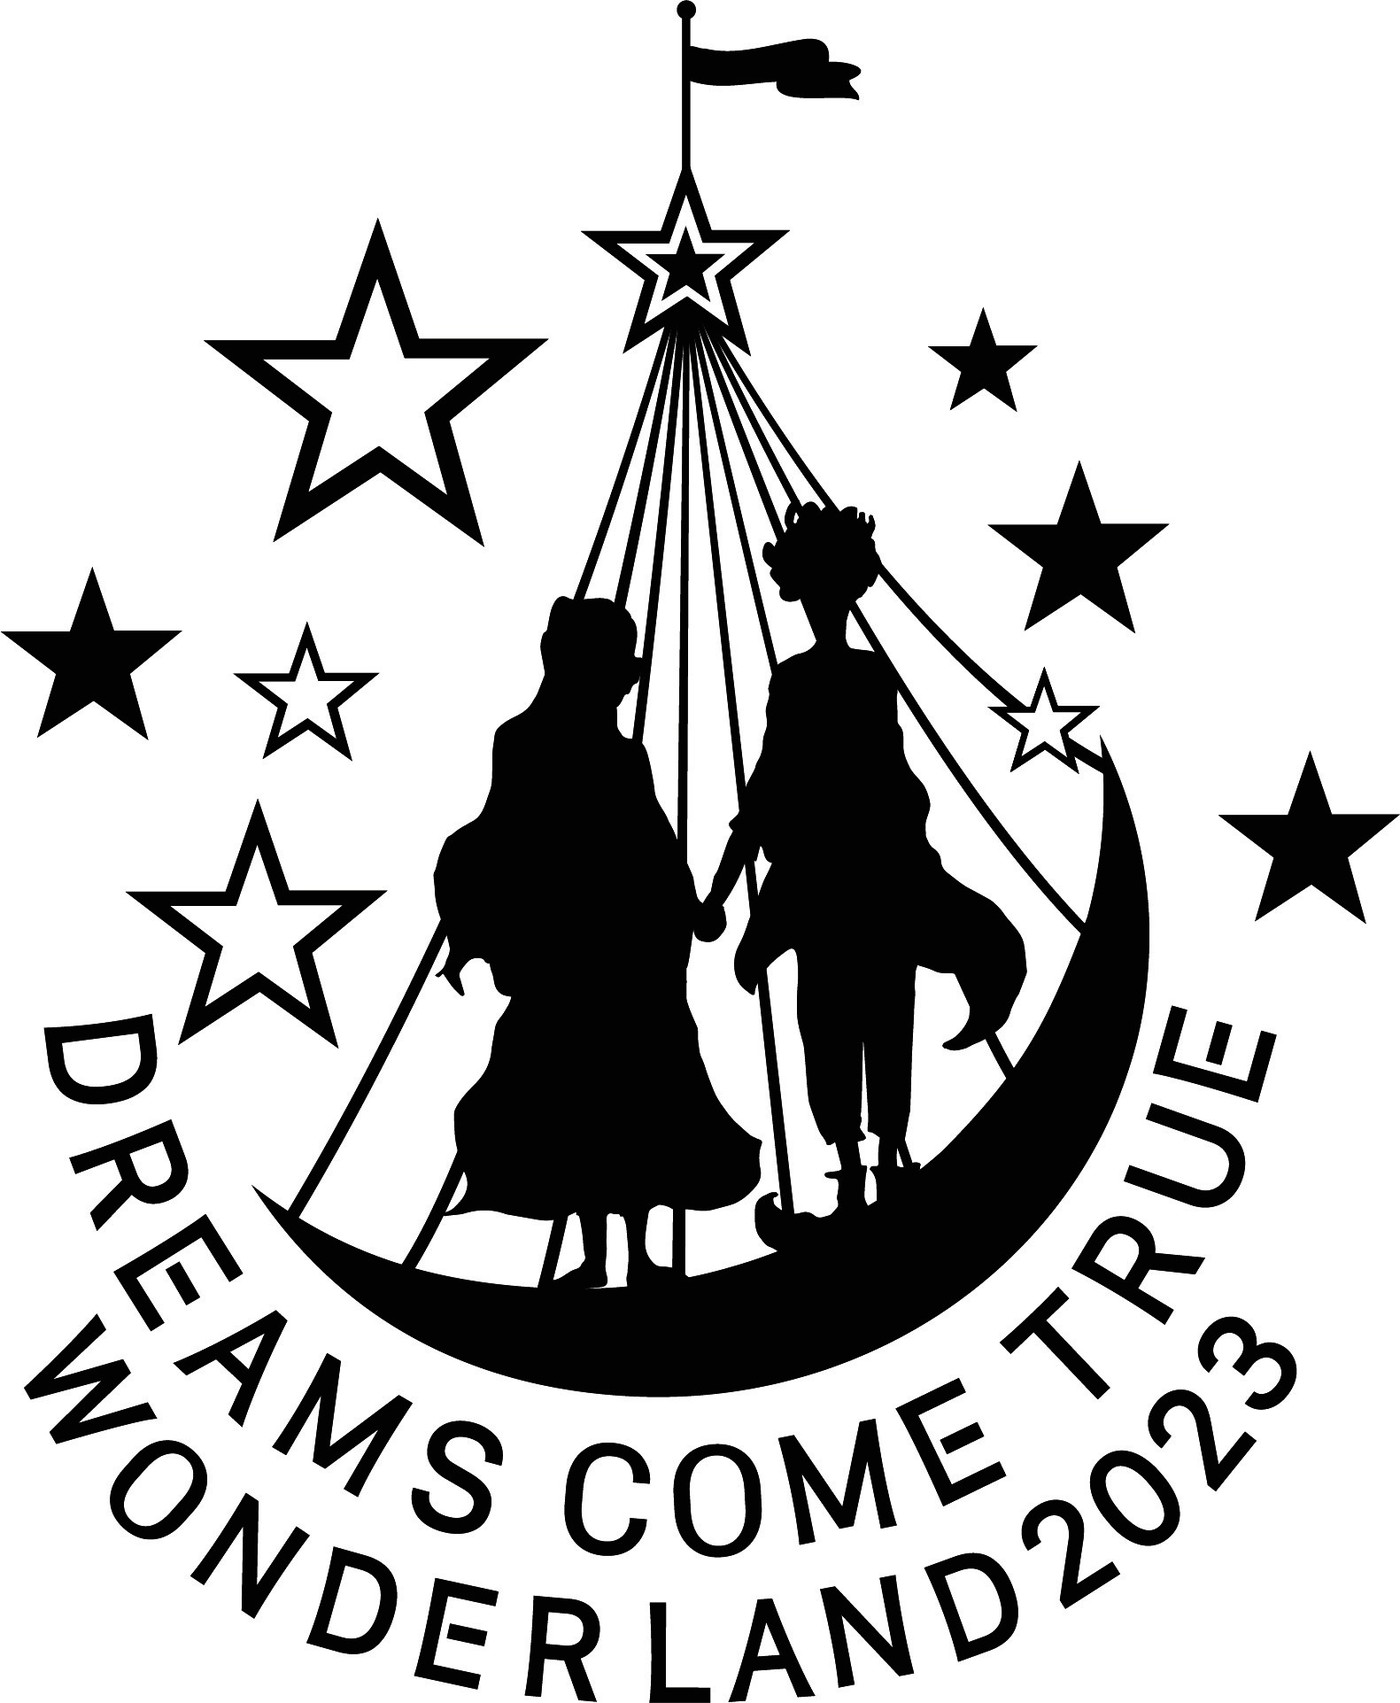 DREAMS COME TRUE、『史上最強の移動遊園地 2023』の詳細解禁！ 9回目となるグレイテストヒッツライヴ - 画像一覧（2/4）